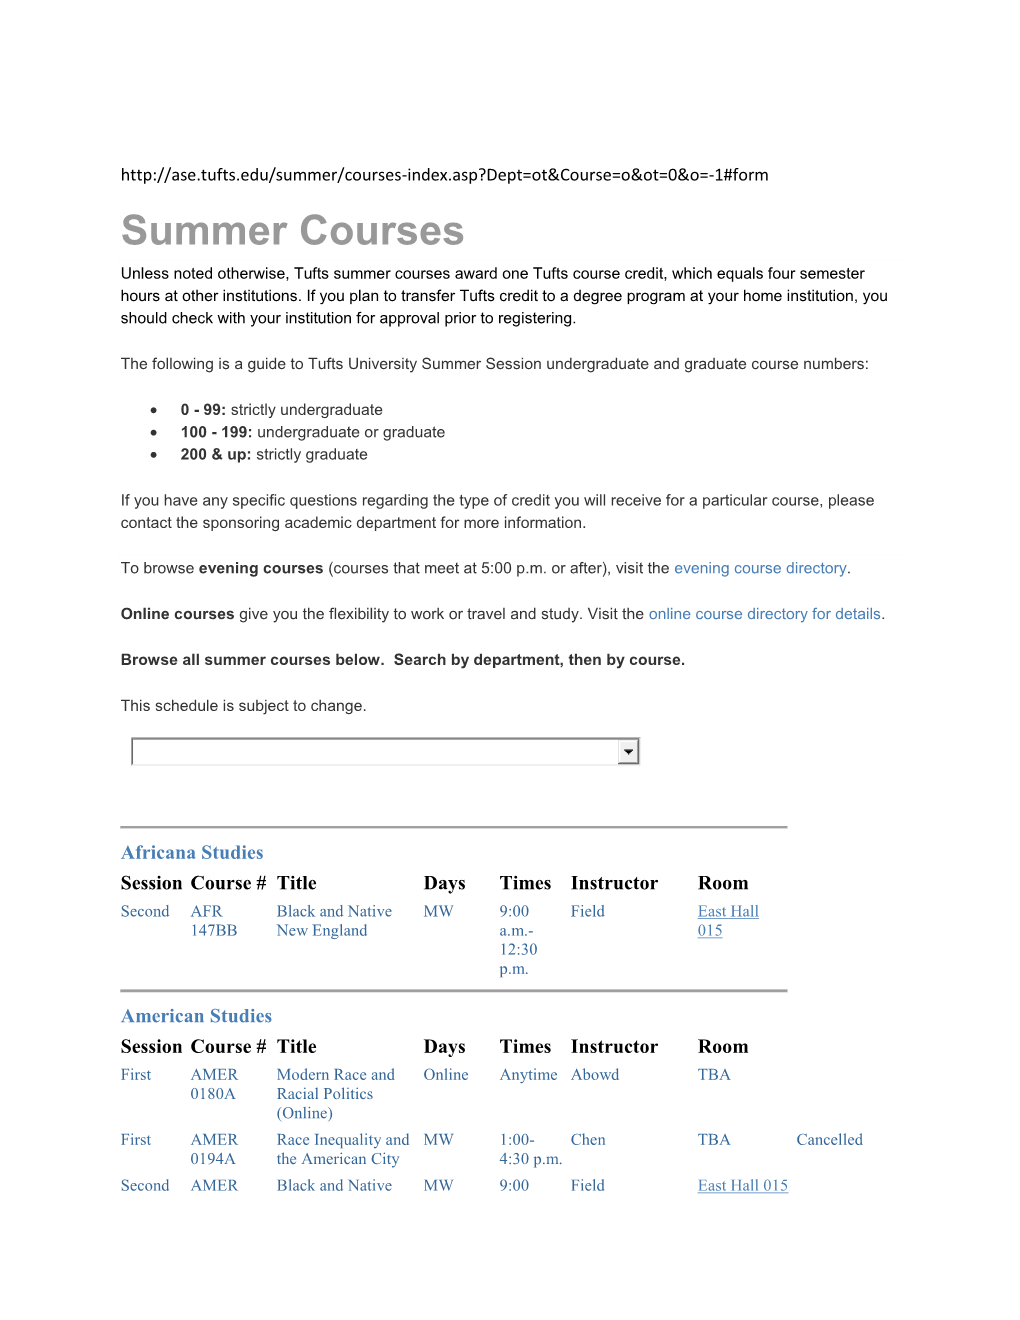 Summer Courses Unless Noted Otherwise, Tufts Summer Courses Award One Tufts Course Credit, Which Equals Four Semester Hours at Other Institutions